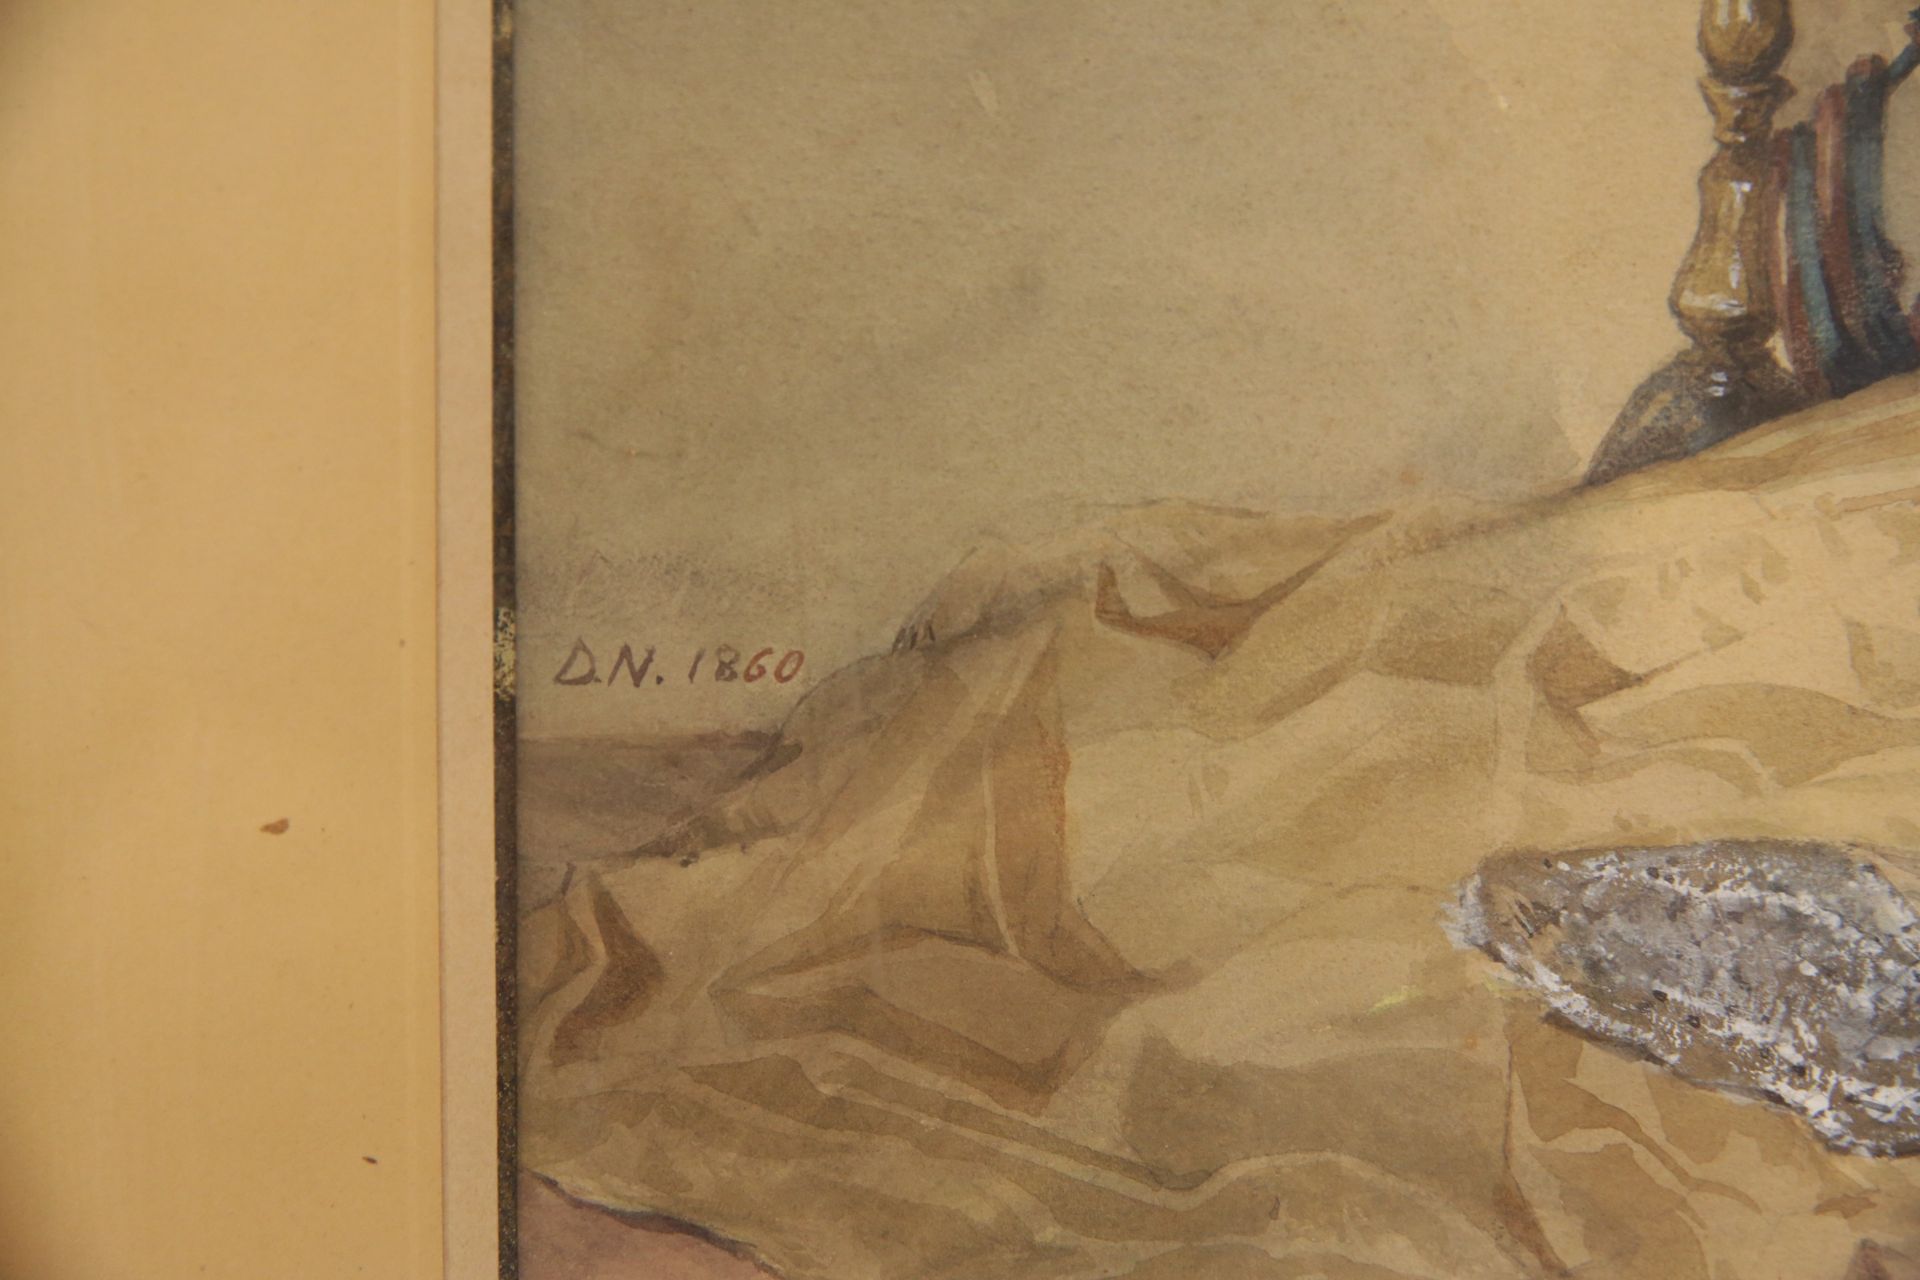 "Woman lying with a bunch of grapes", 1860, watercolor on paper, signed by the artist monogram D N. - Image 4 of 4